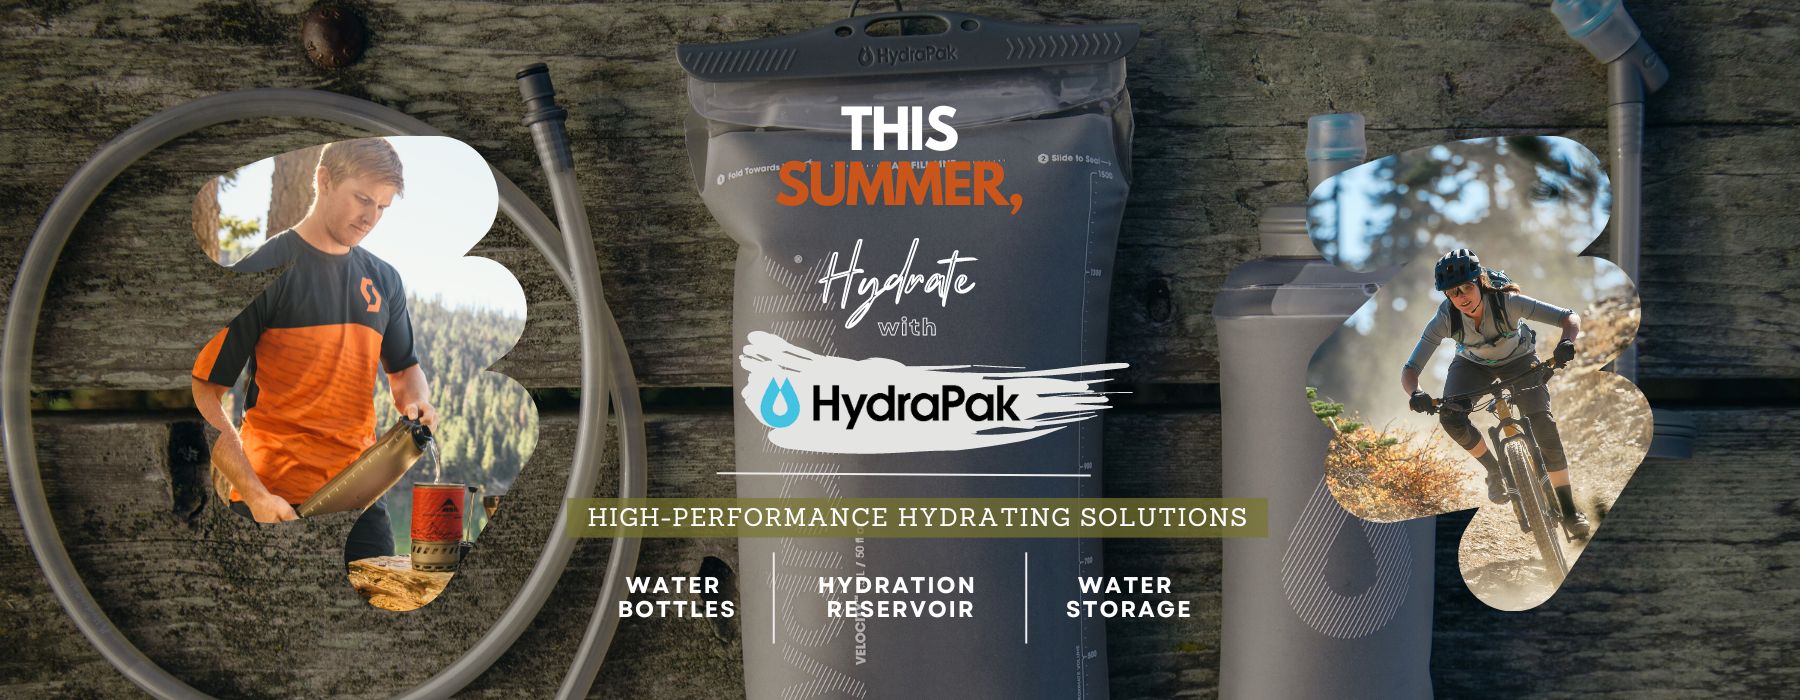 HYDRAPAK - High Performance Hydrating Solutions | OutdoorTravelGear.com